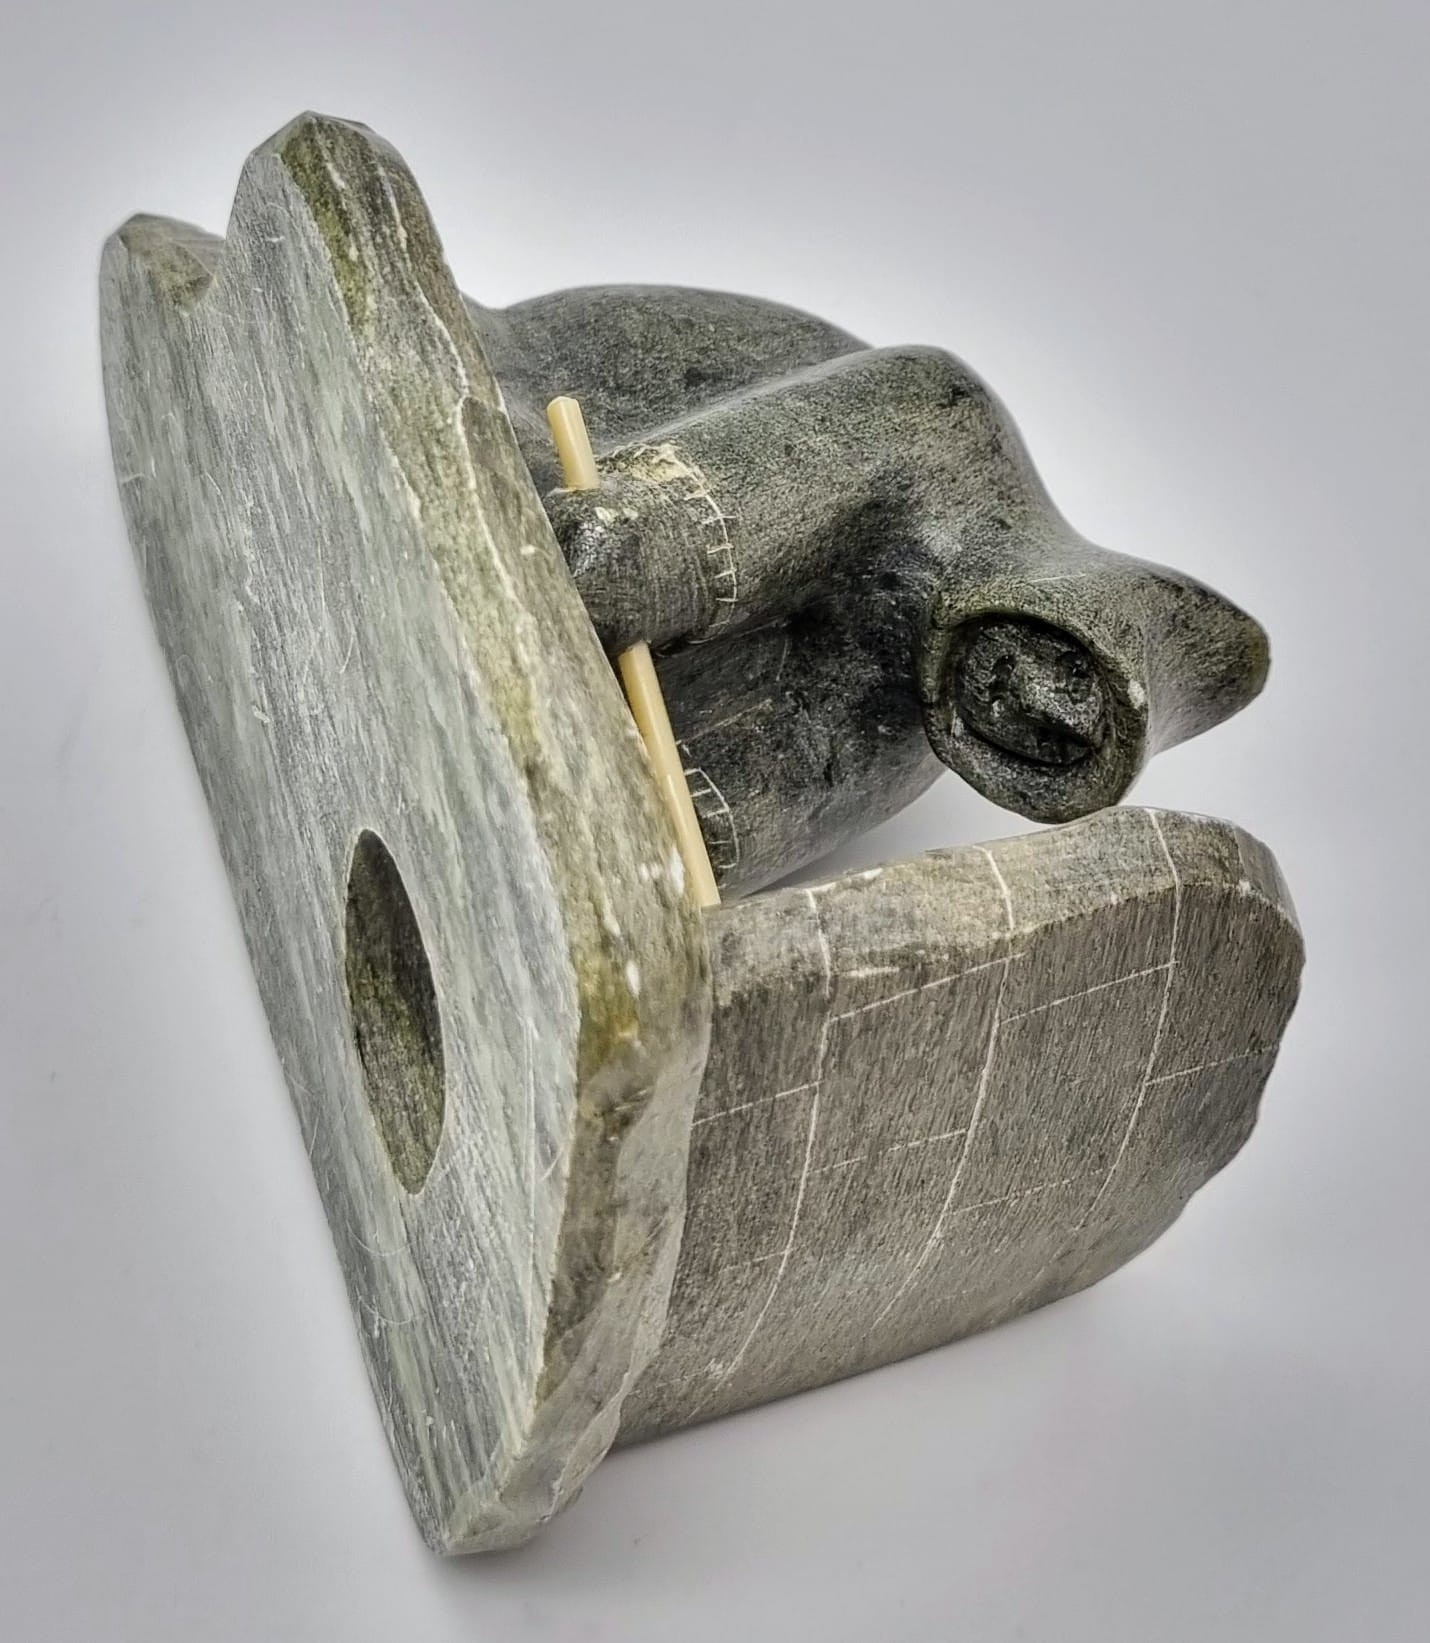 An Antique Newfoundland and Labrador Inuit Soapstone Hand-Carved Figure of an Ice Fisherman. - Image 4 of 6